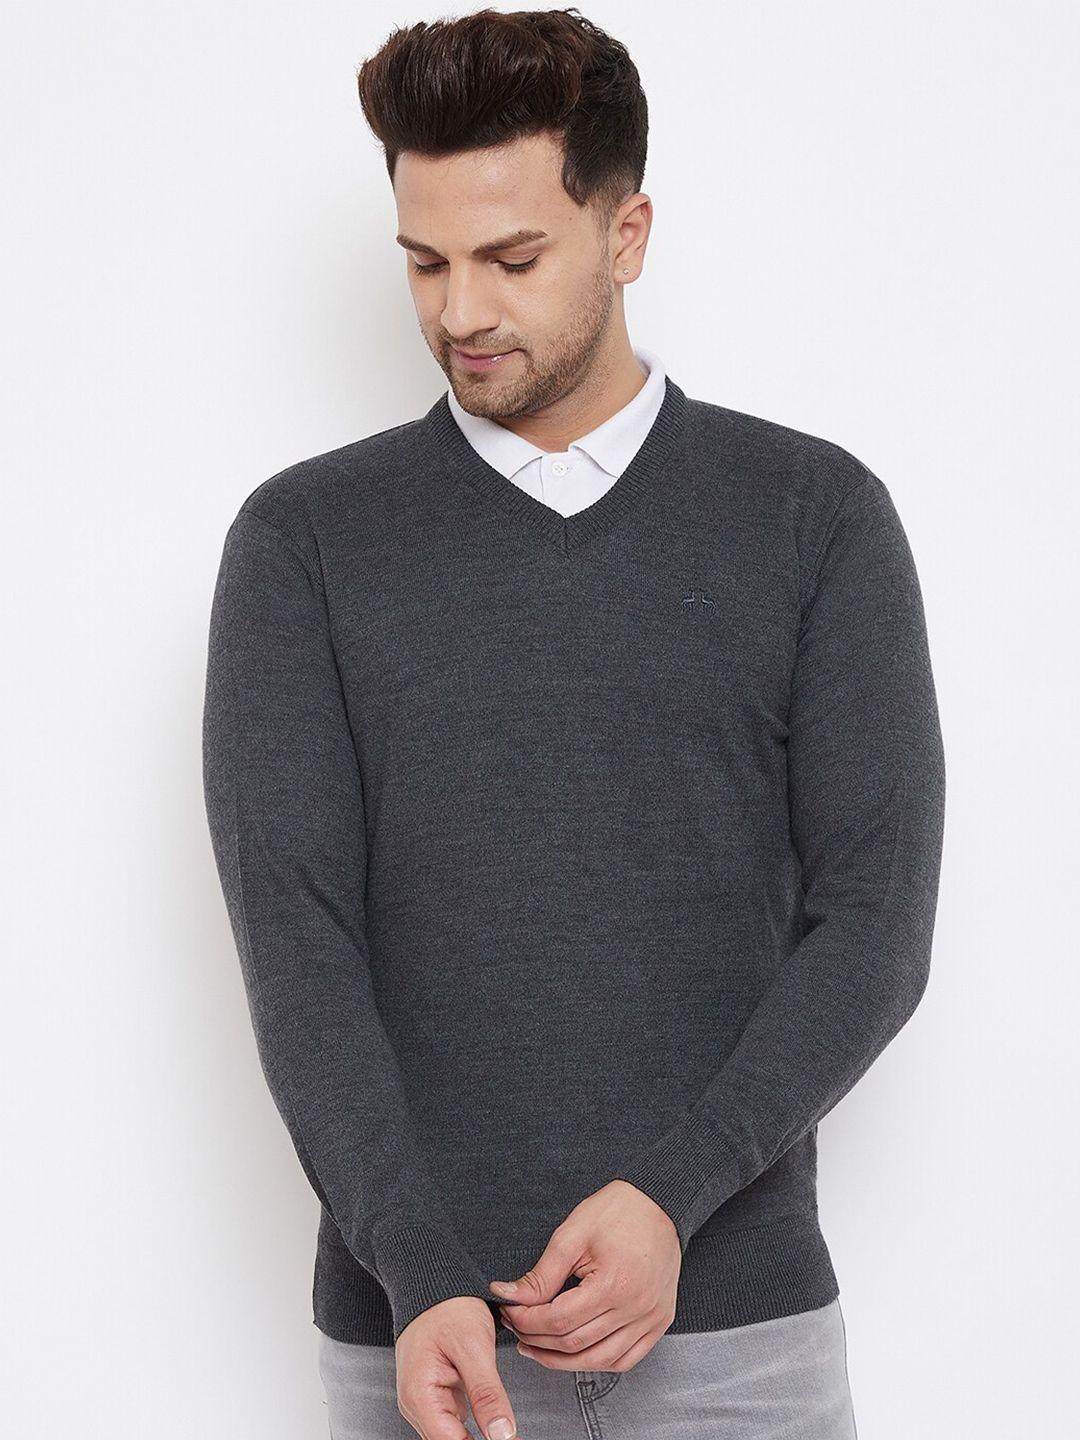 98 degree north men charcoal sweater